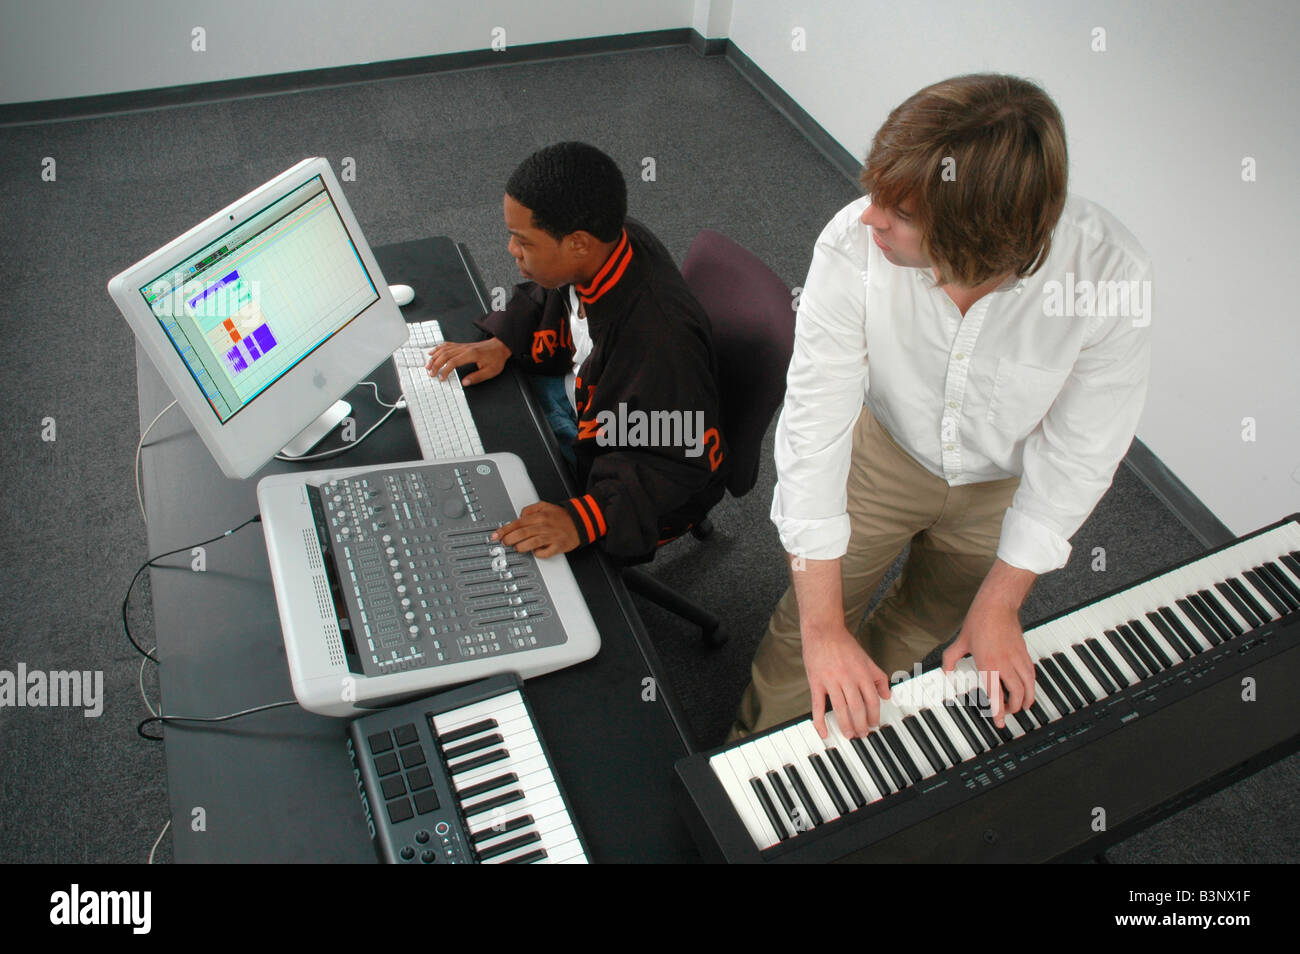 Two men in an audio production session one at keyboard the other at the mixing board Stock Photo